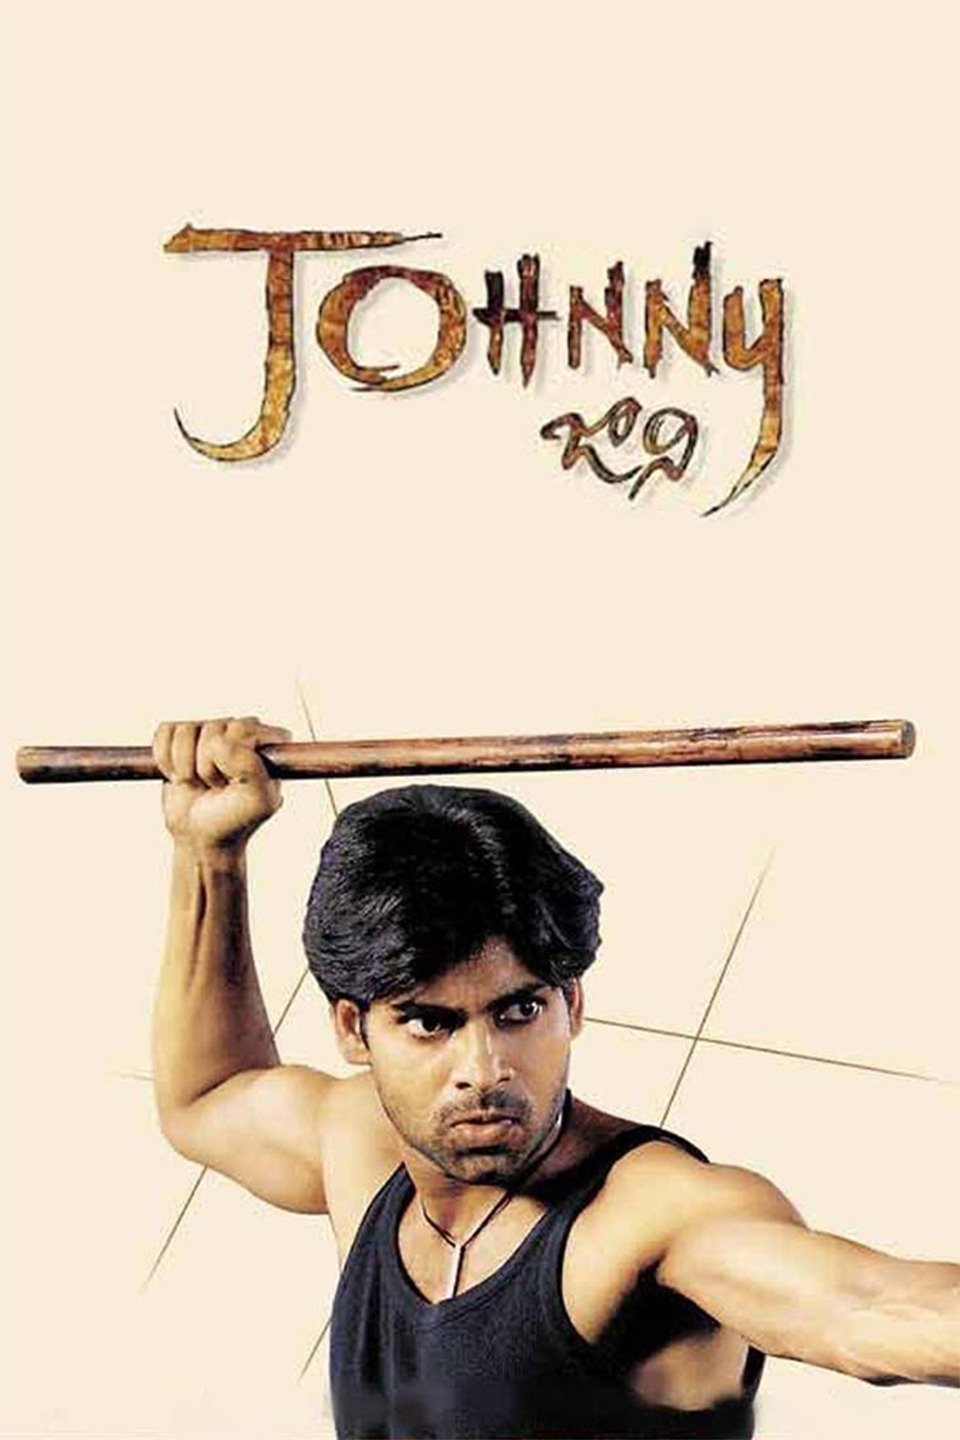 johnny movie songs download